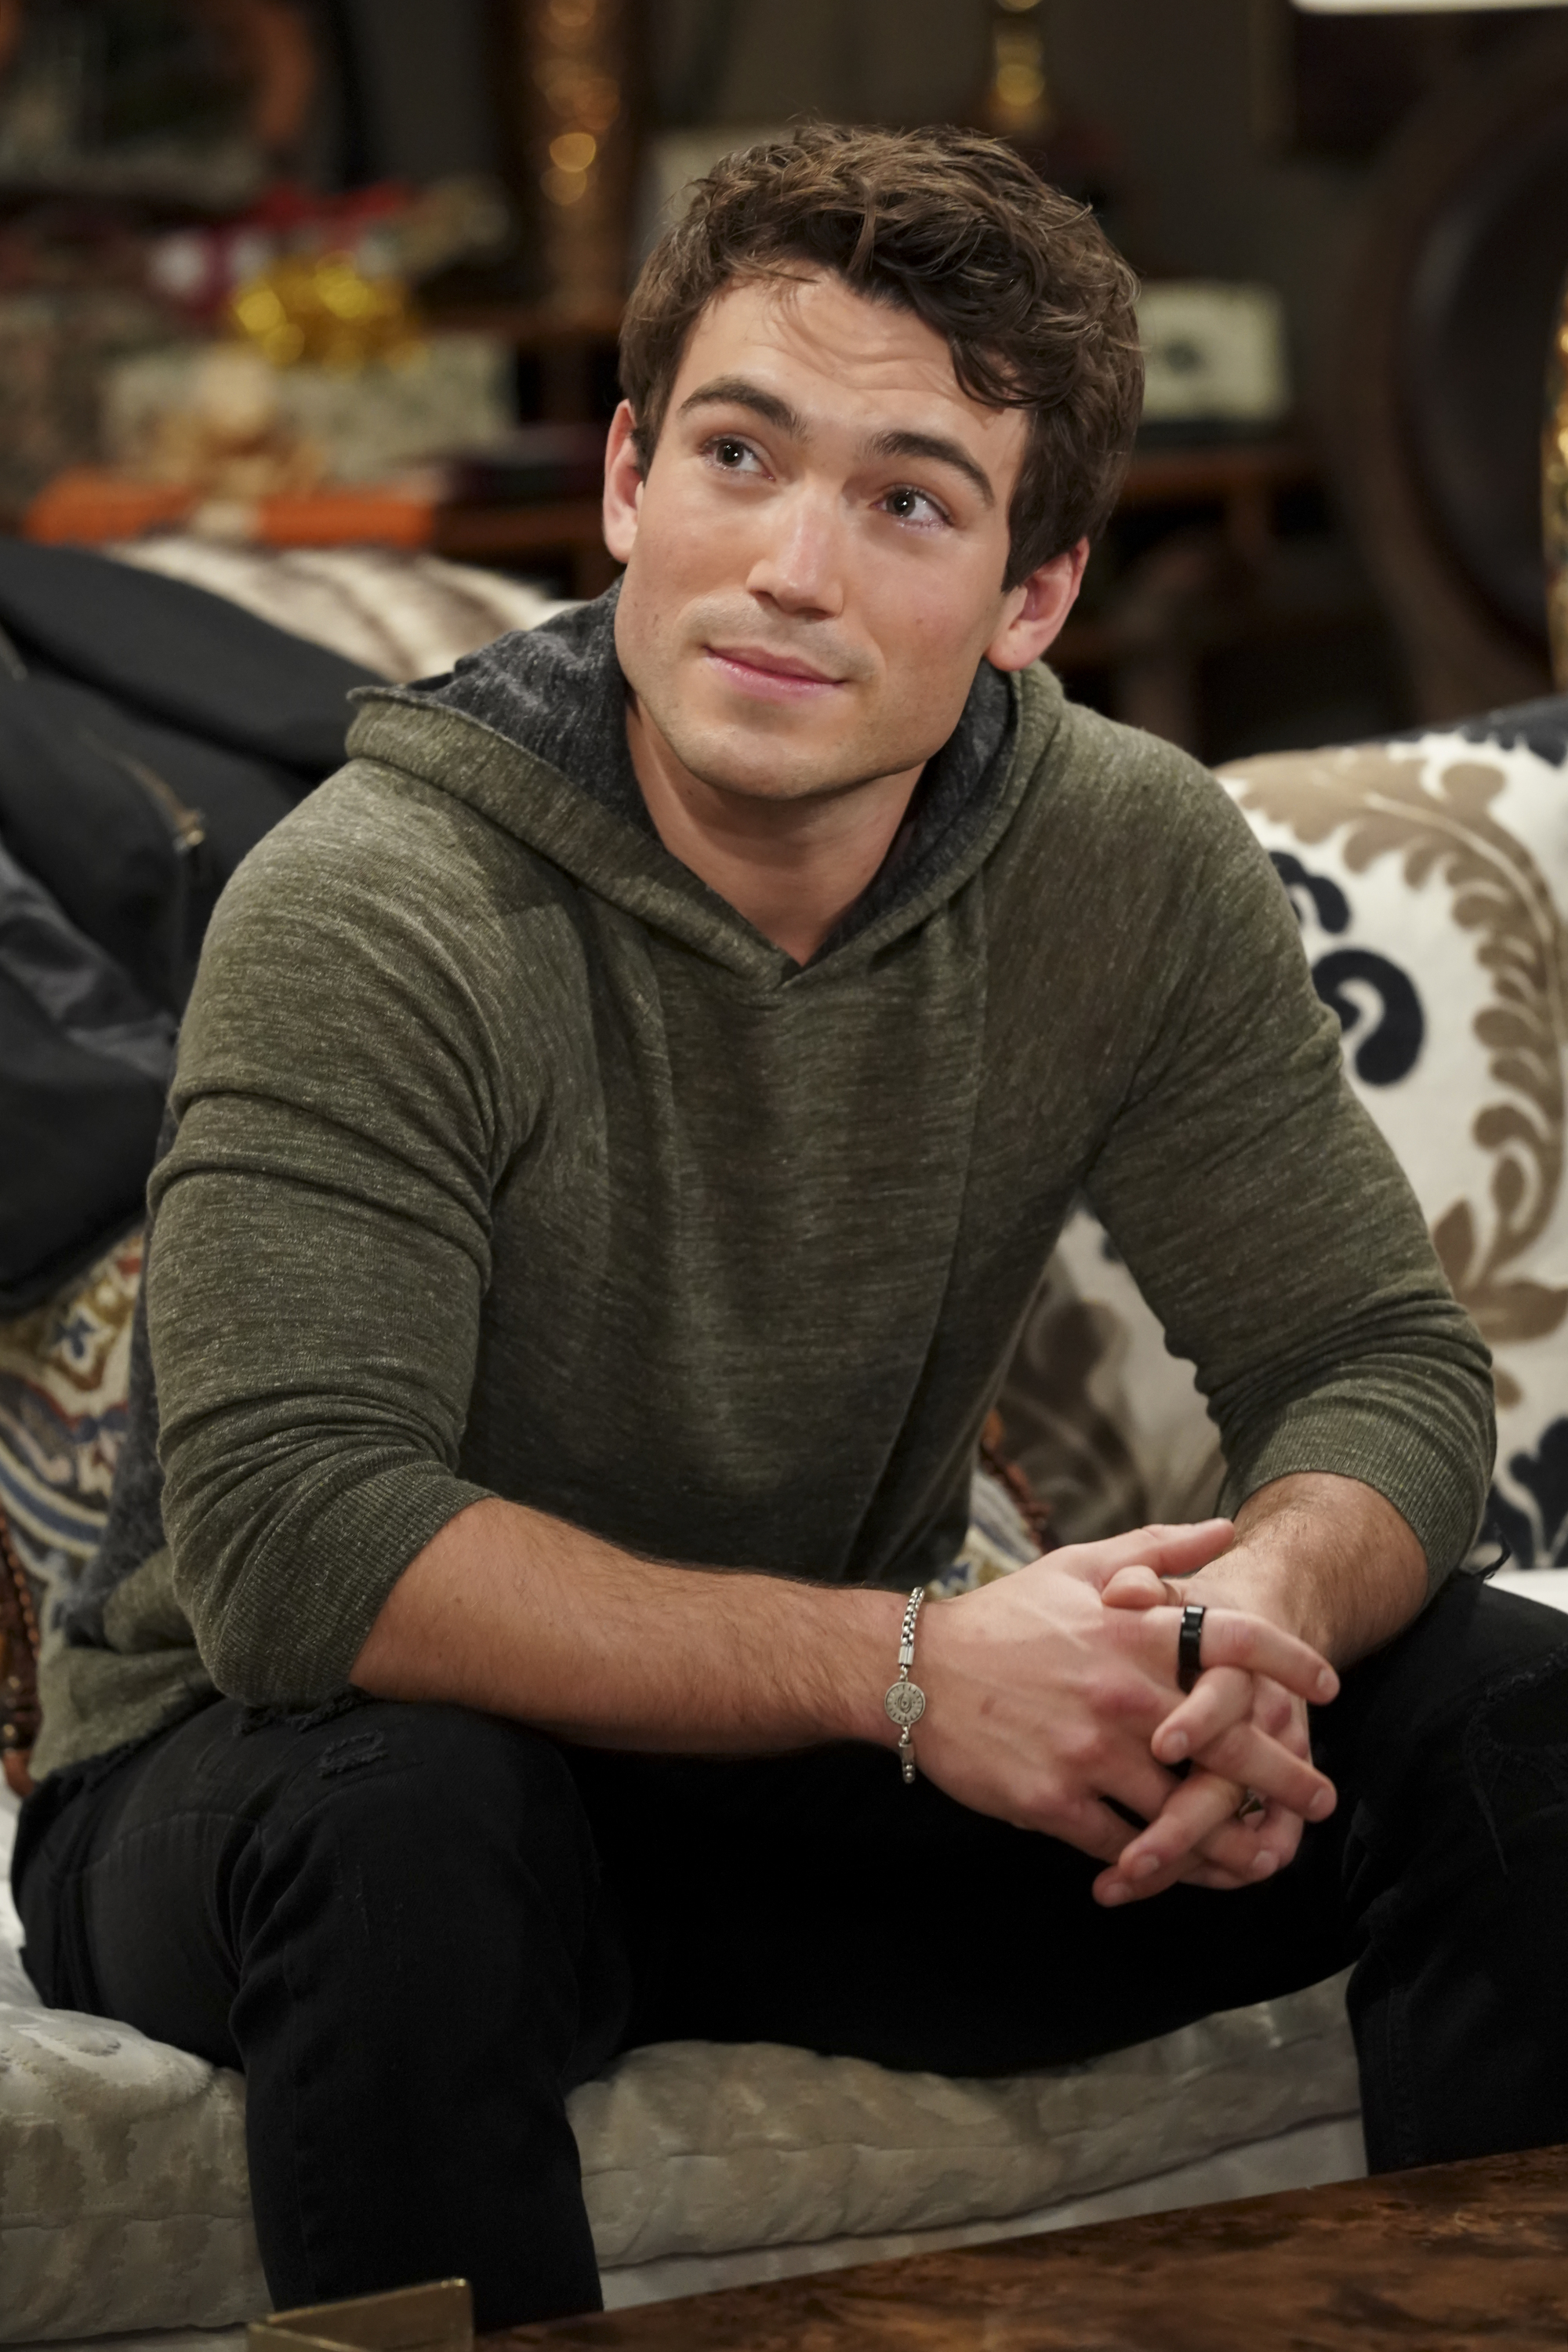 'The Young and the Restless' actor Rory Gibson wearing a grey shirt and black pants sits on a couch.